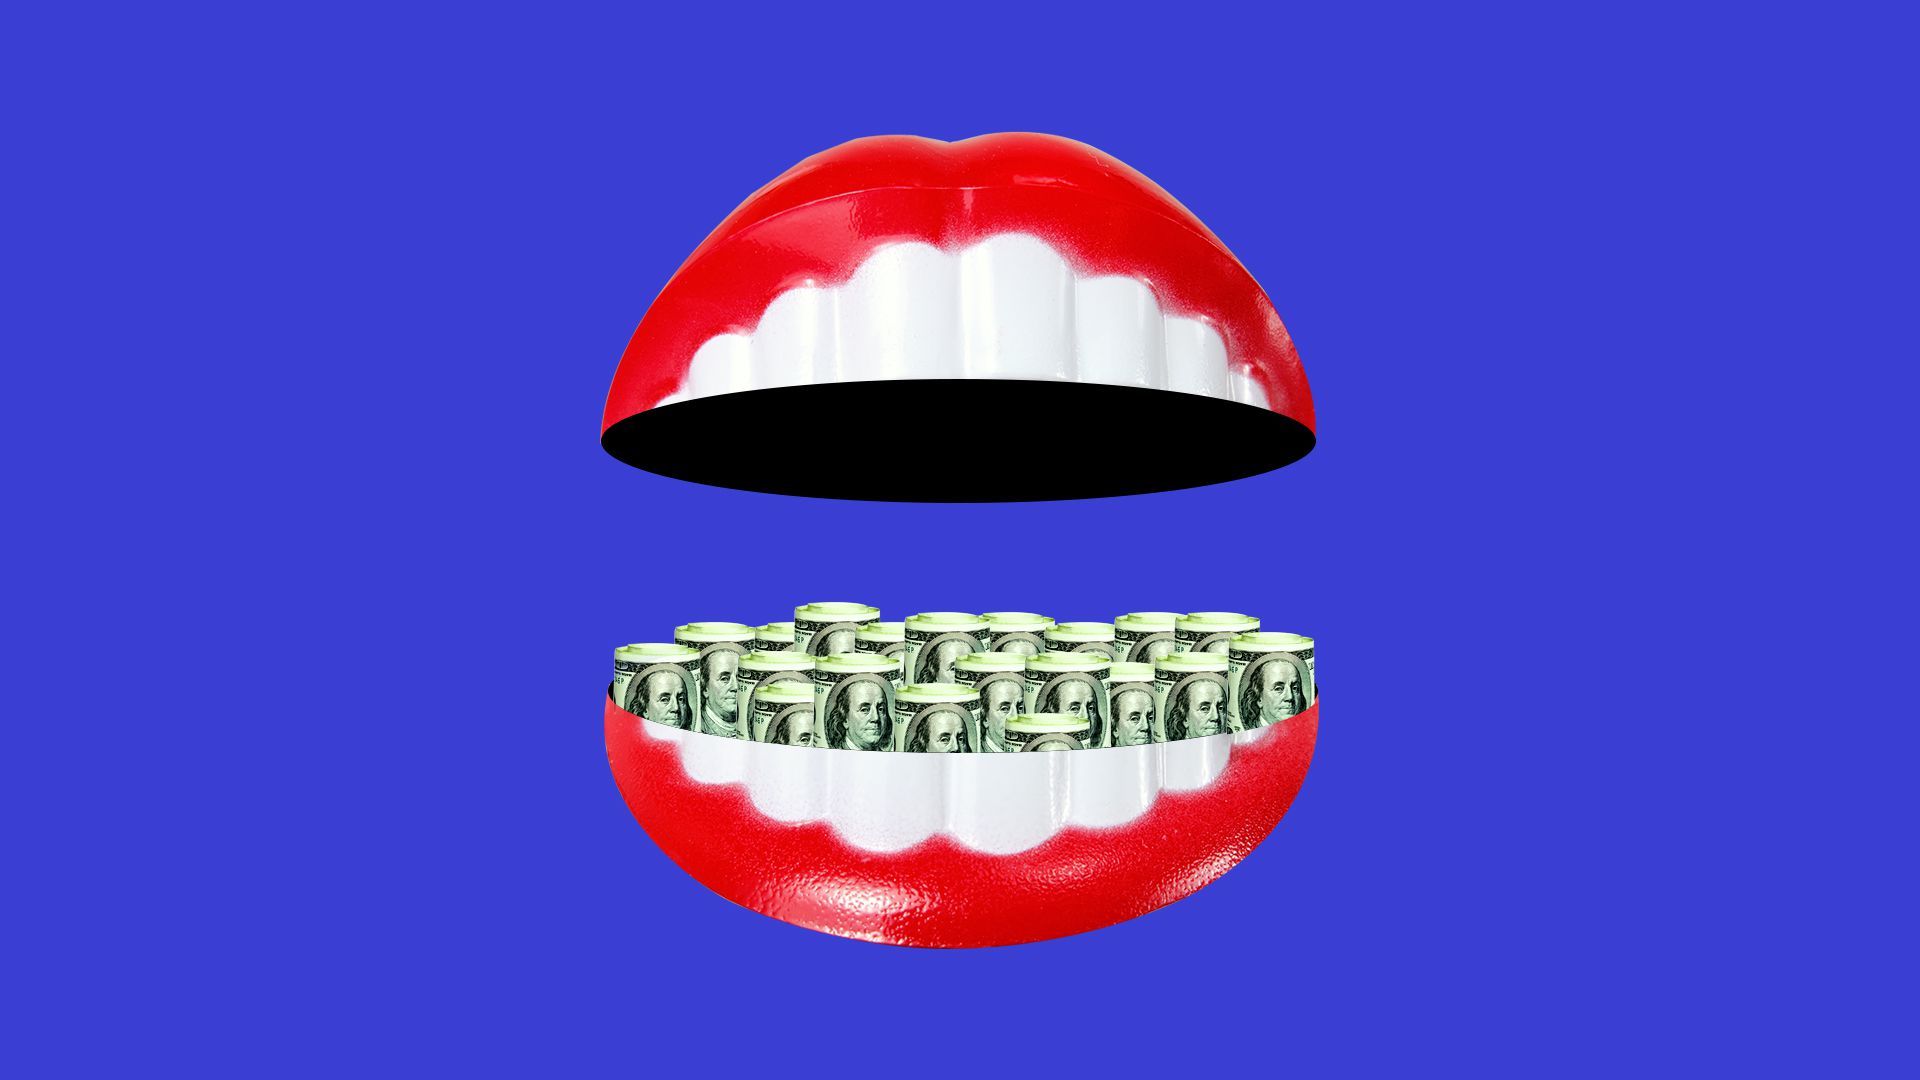 Illustration of a mouth half open, filled with dollar bills.